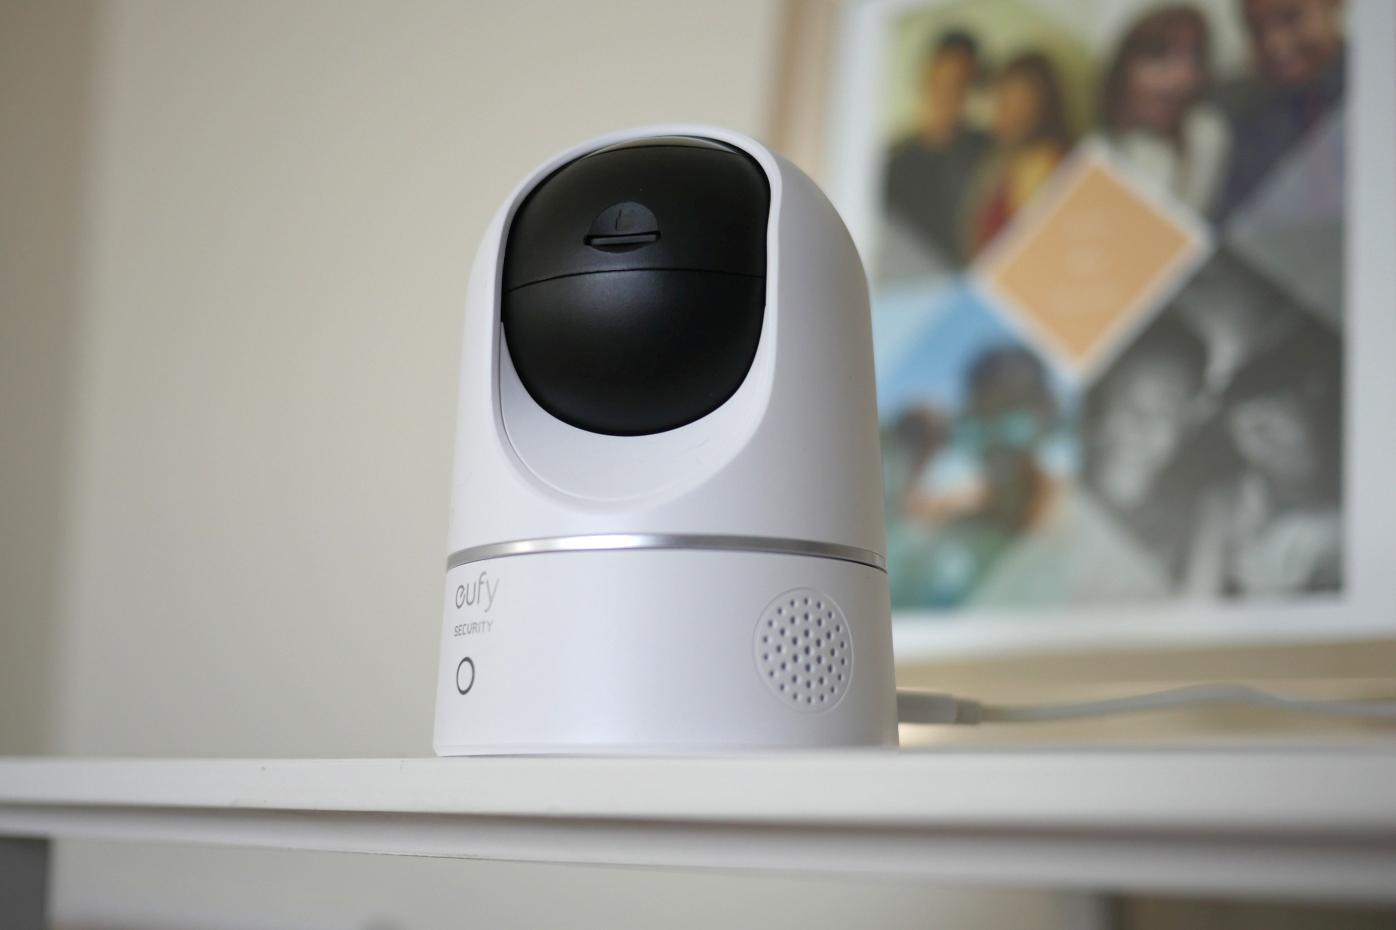 Eufy's new range fixes the biggest issue with home security cameras